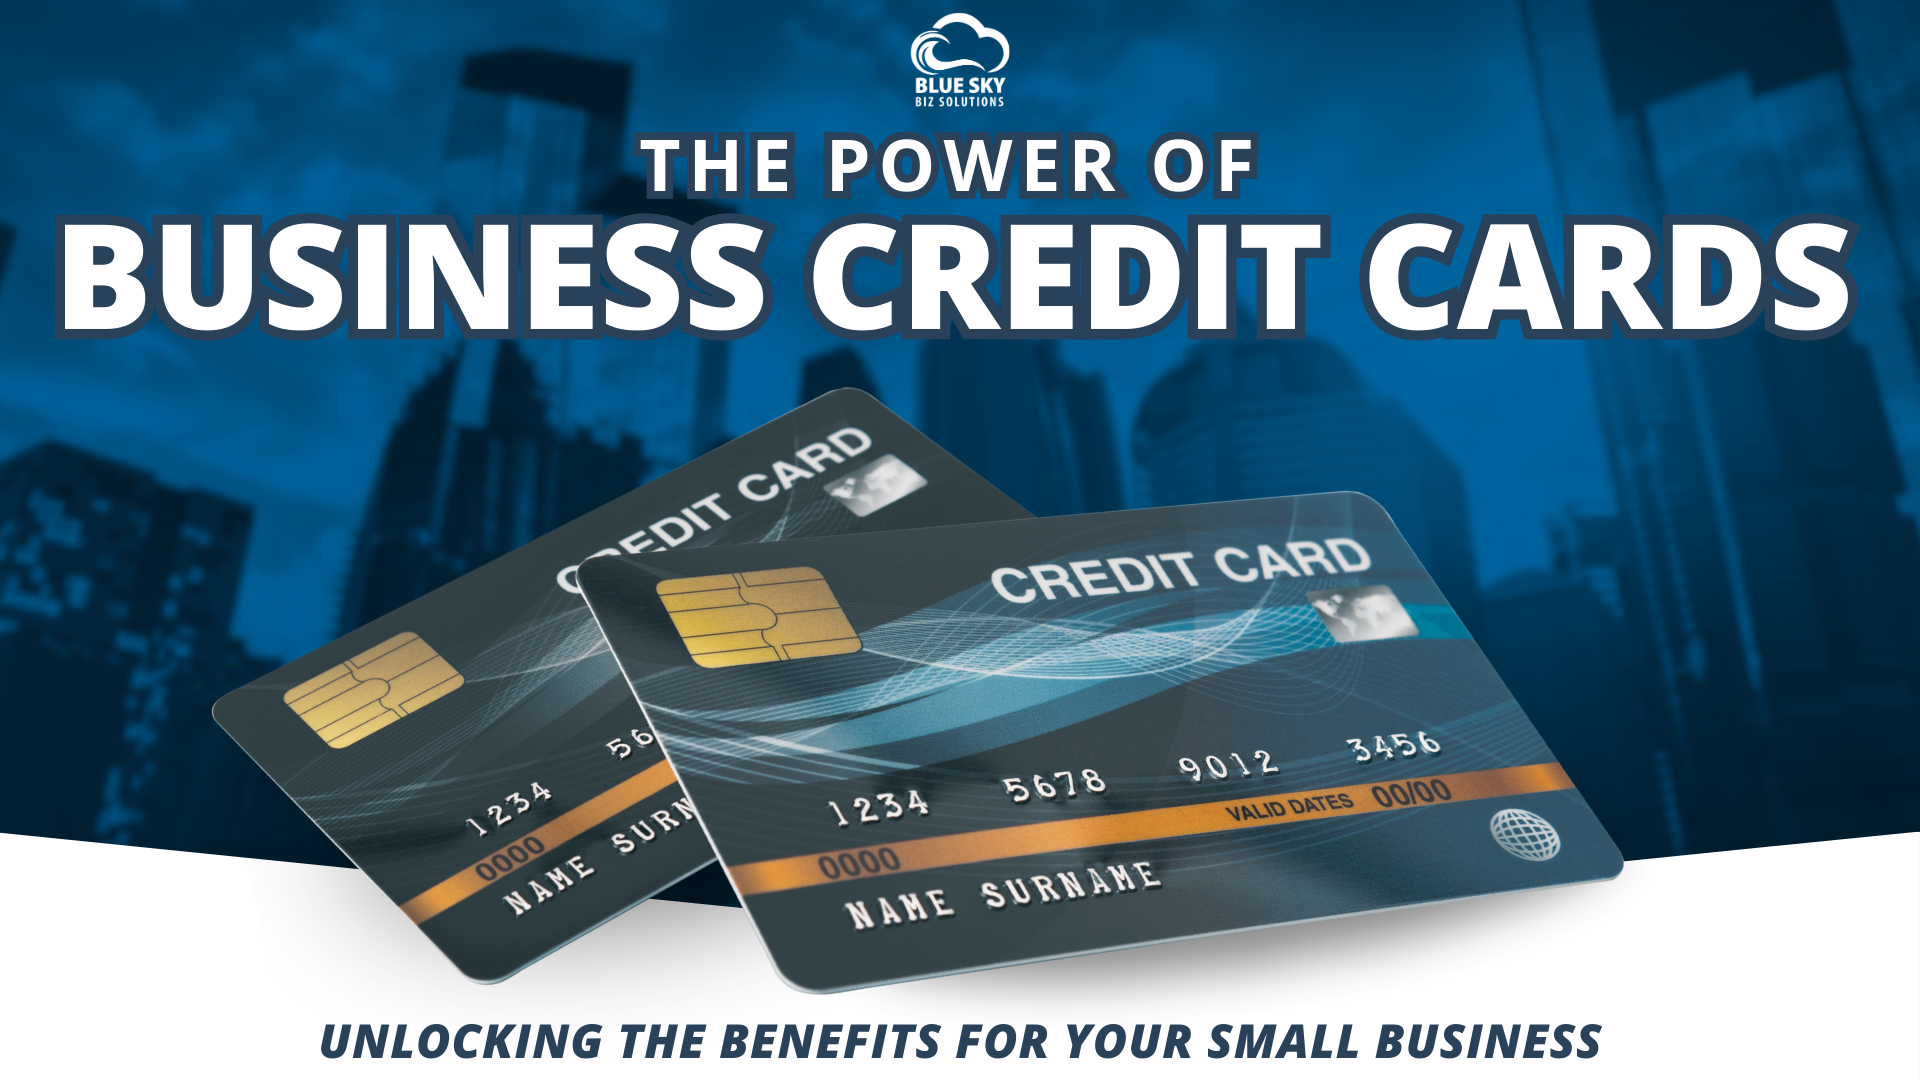 The Power of Business Credit Cards: Unlocking Benefits for Your Small Business